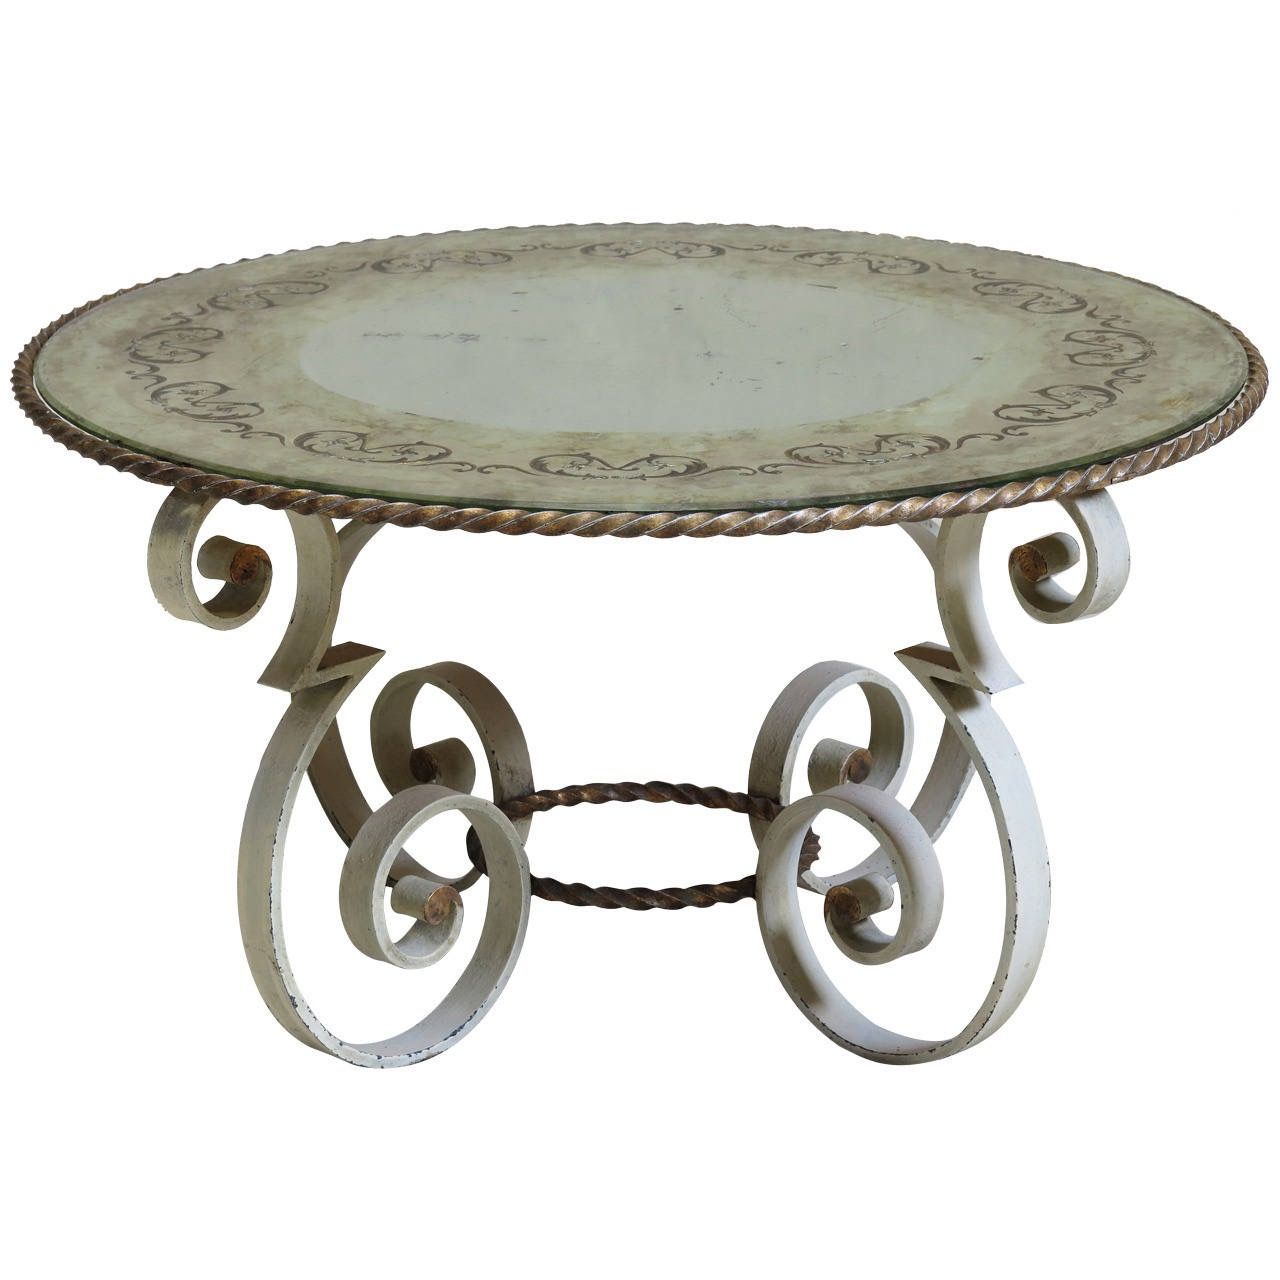 Round Wrought Iron Coffee Table • Display Cabinet Throughout Latest Round Iron Coffee Tables (View 5 of 20)